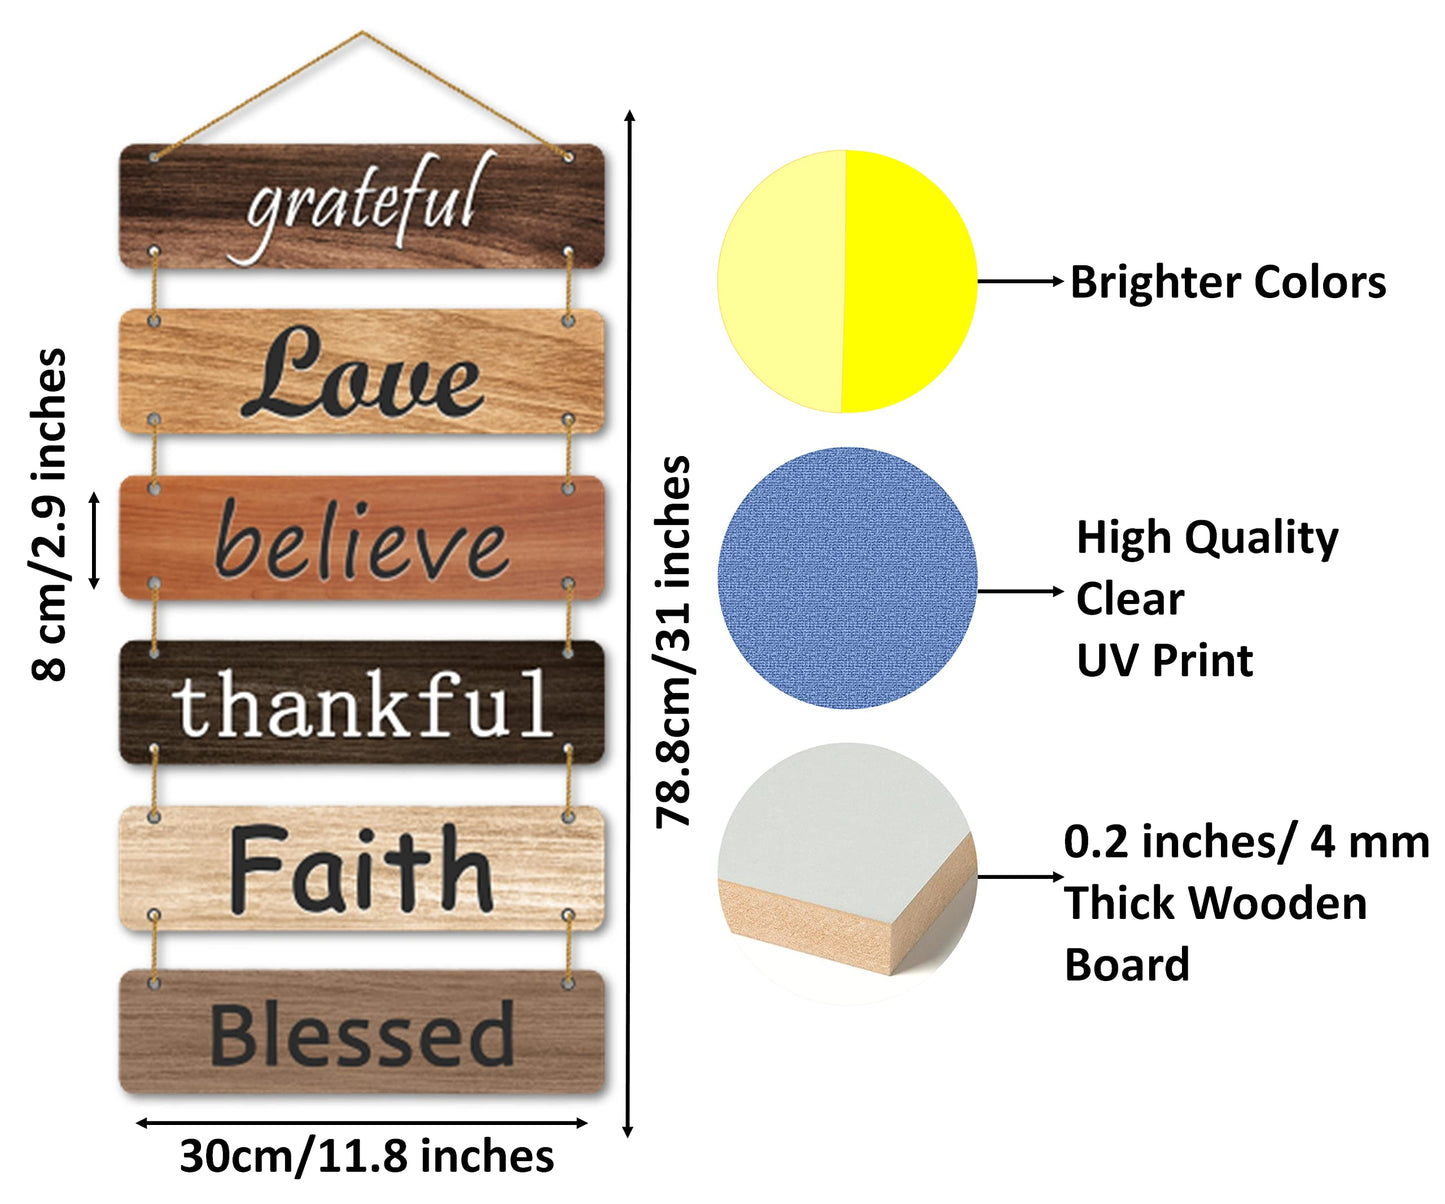 The Earthy House Room Décor Wall Hanging | Living Room | Bedroom| Home Décor | Inspirational Quotes - Grateful Love Believe (Set of 6)